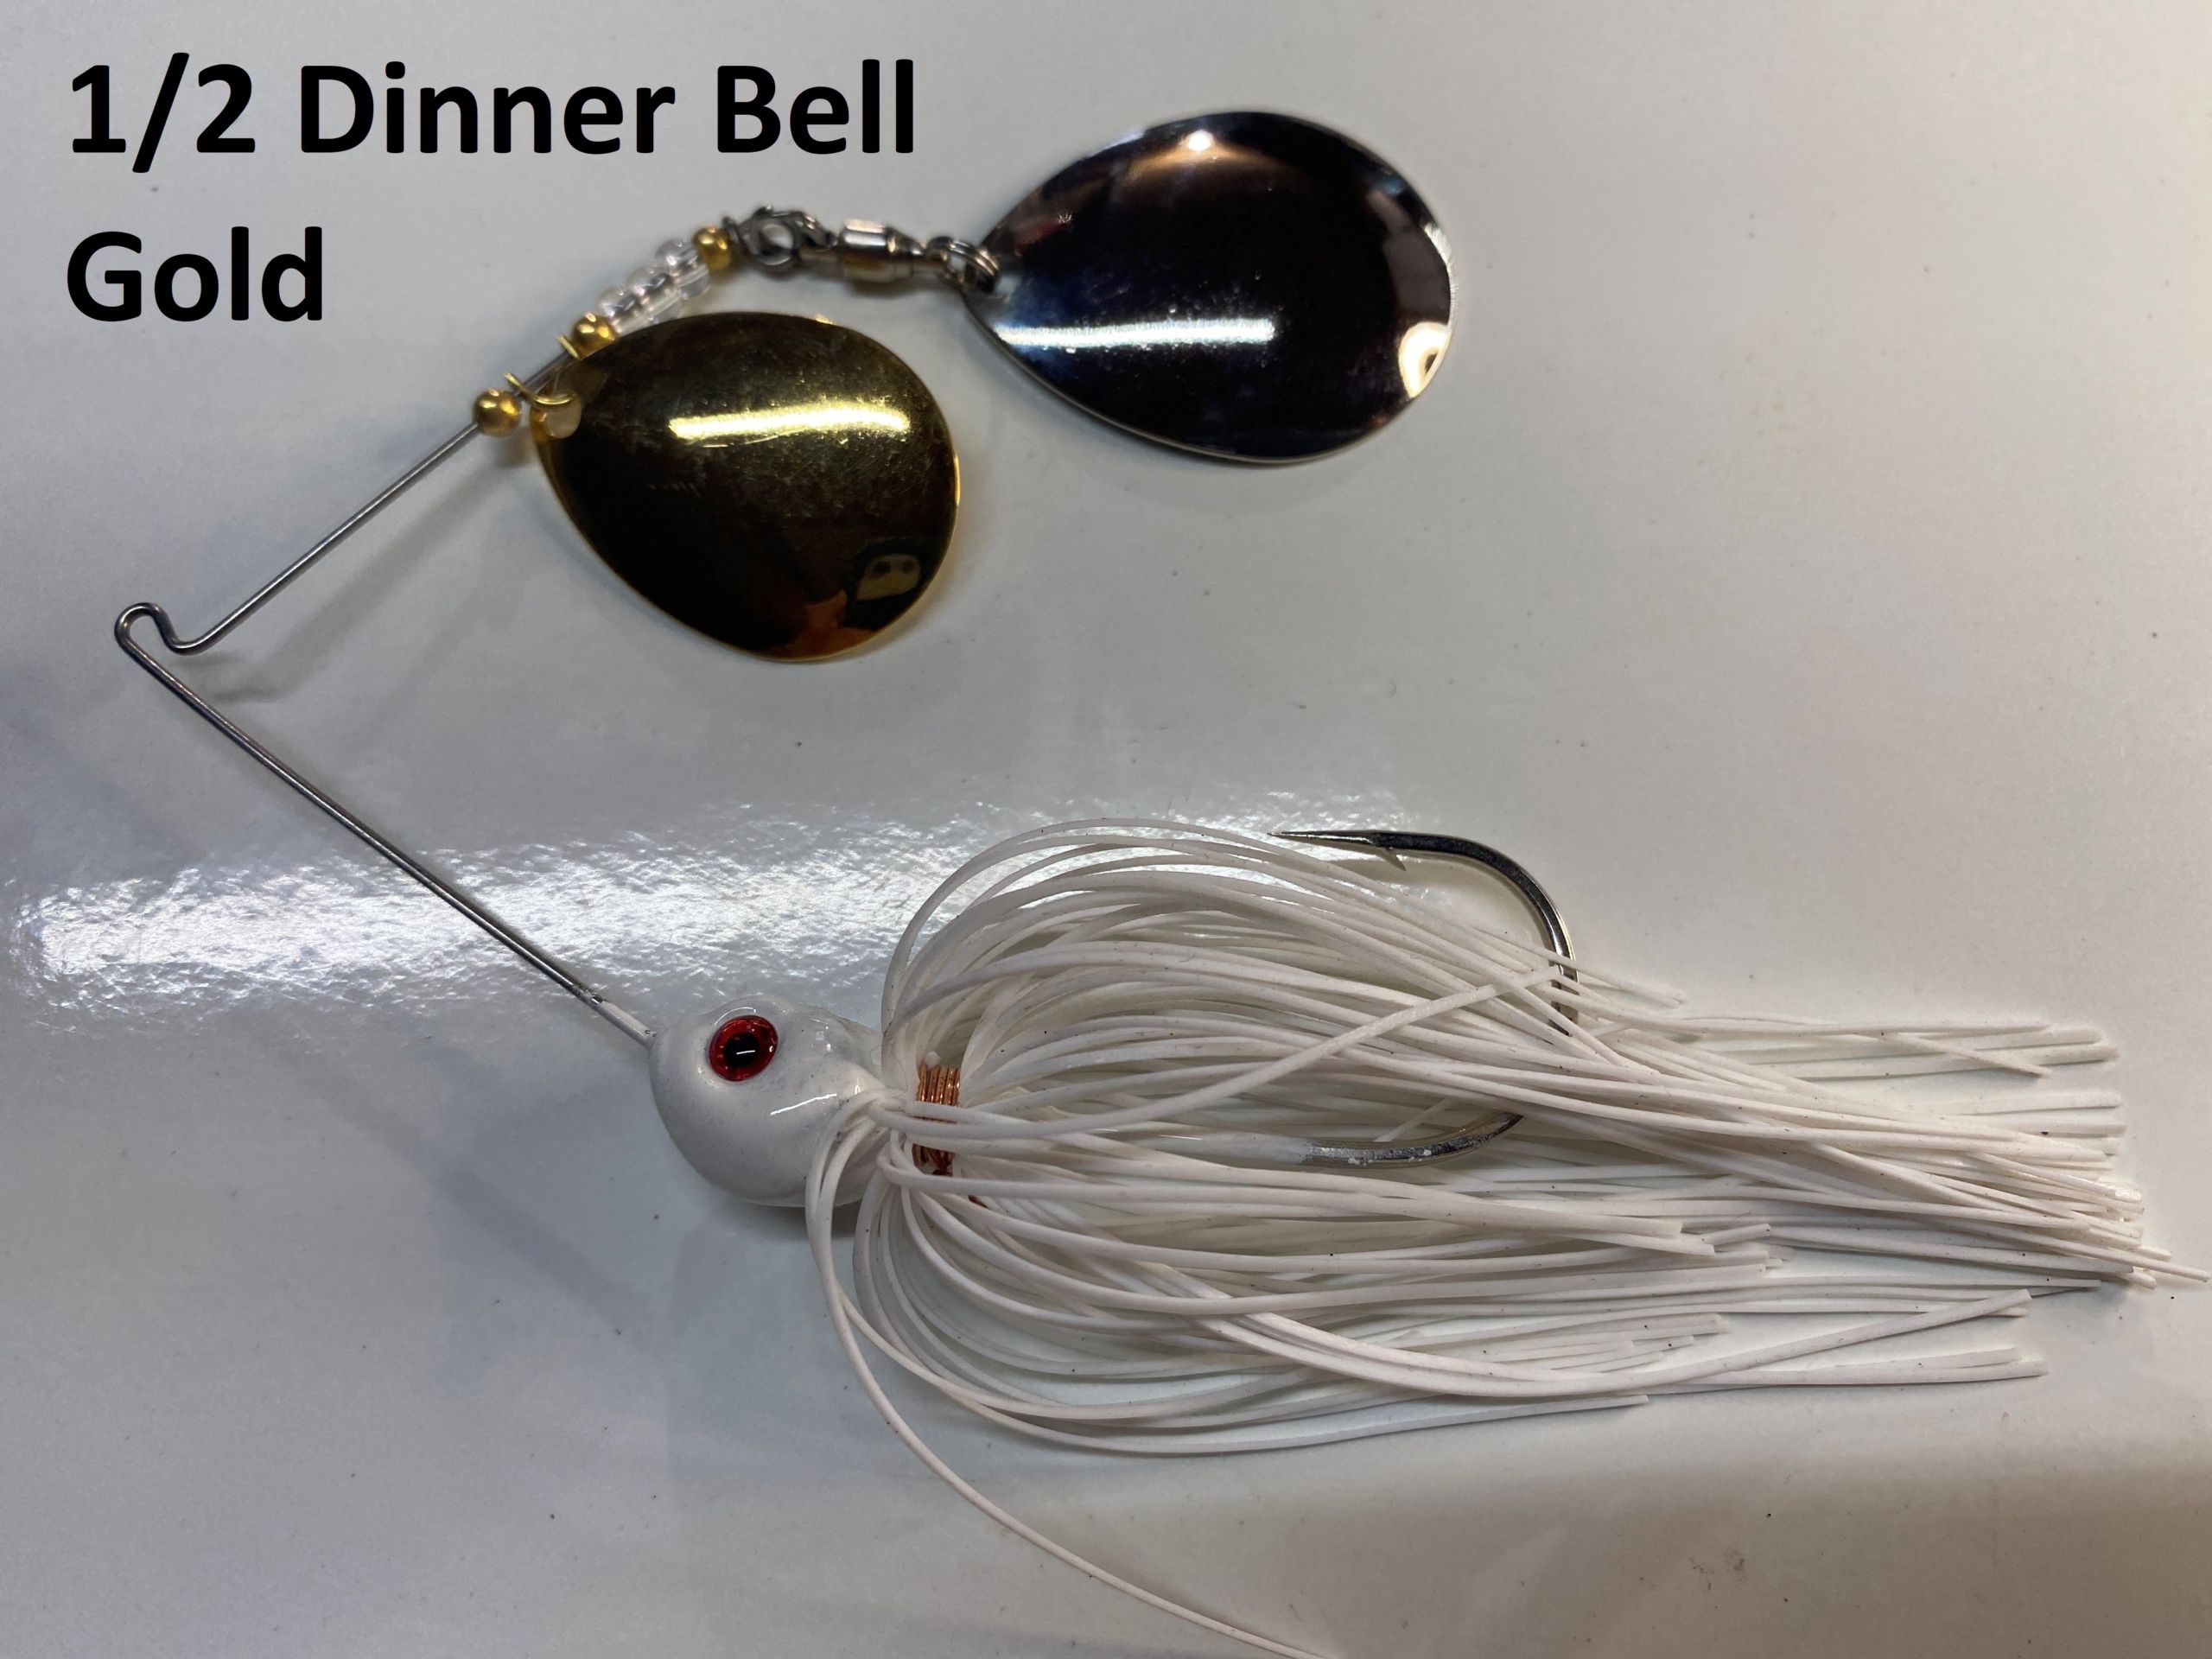 1/2 Dinner Bell Gold – Adrenaline Tackle Company 217-502-6880